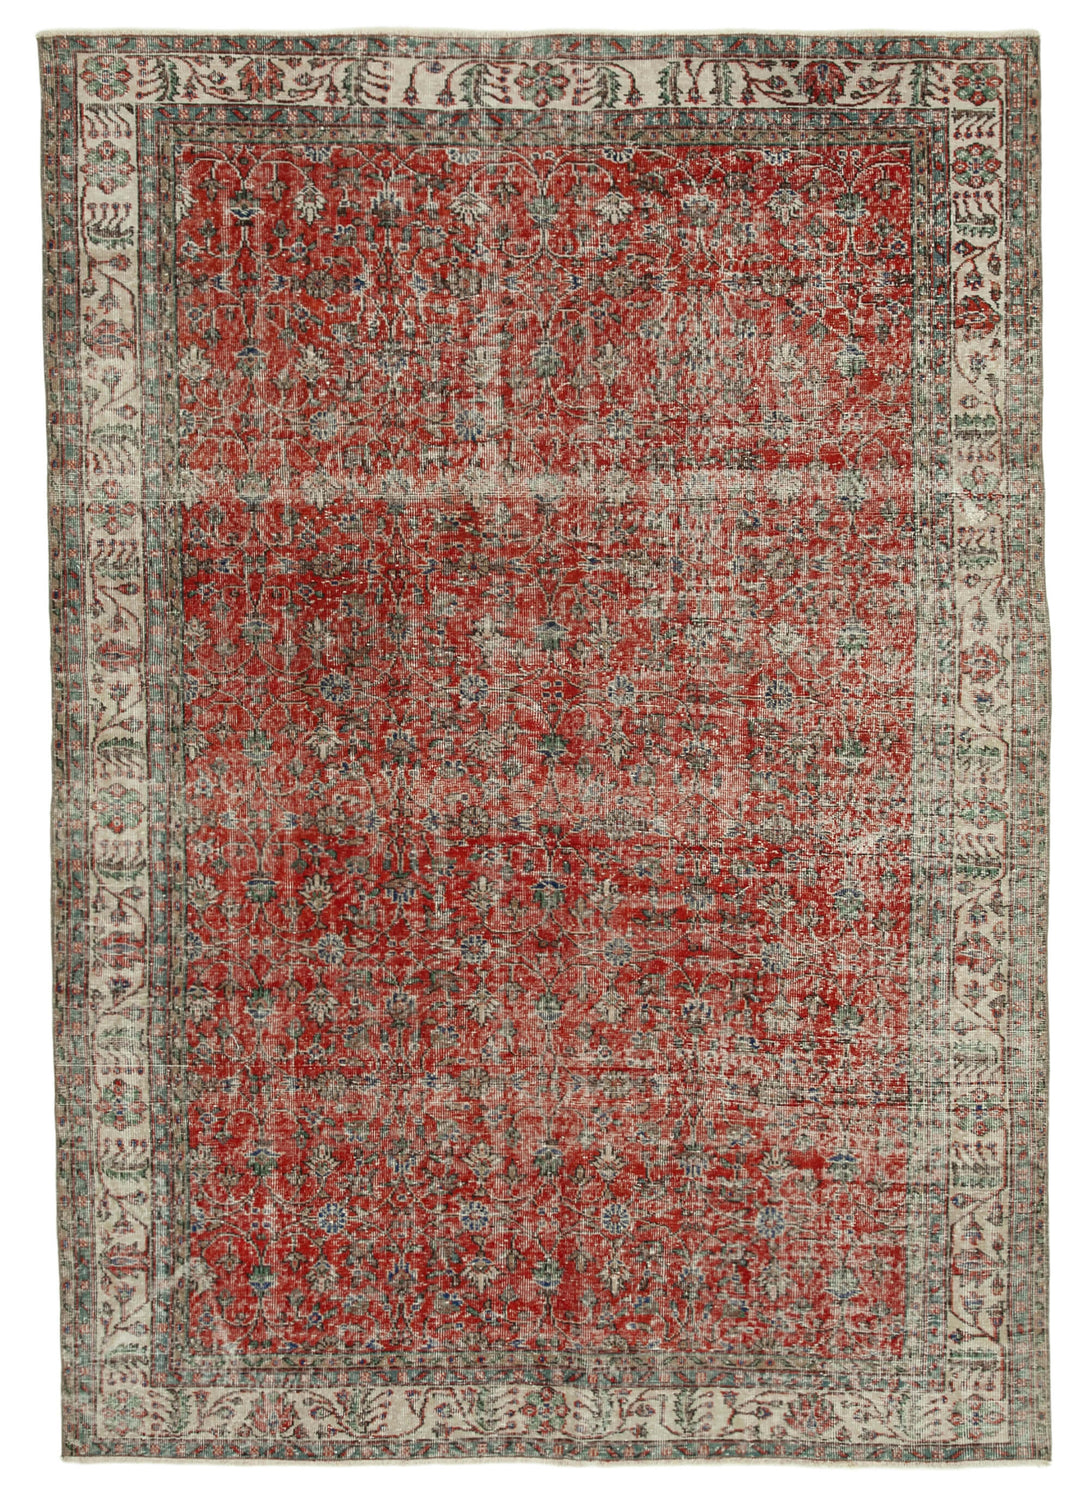 Handmade White Wash Area Rug > Design# OL-AC-36867 > Size: 7'-1" x 10'-2", Carpet Culture Rugs, Handmade Rugs, NYC Rugs, New Rugs, Shop Rugs, Rug Store, Outlet Rugs, SoHo Rugs, Rugs in USA